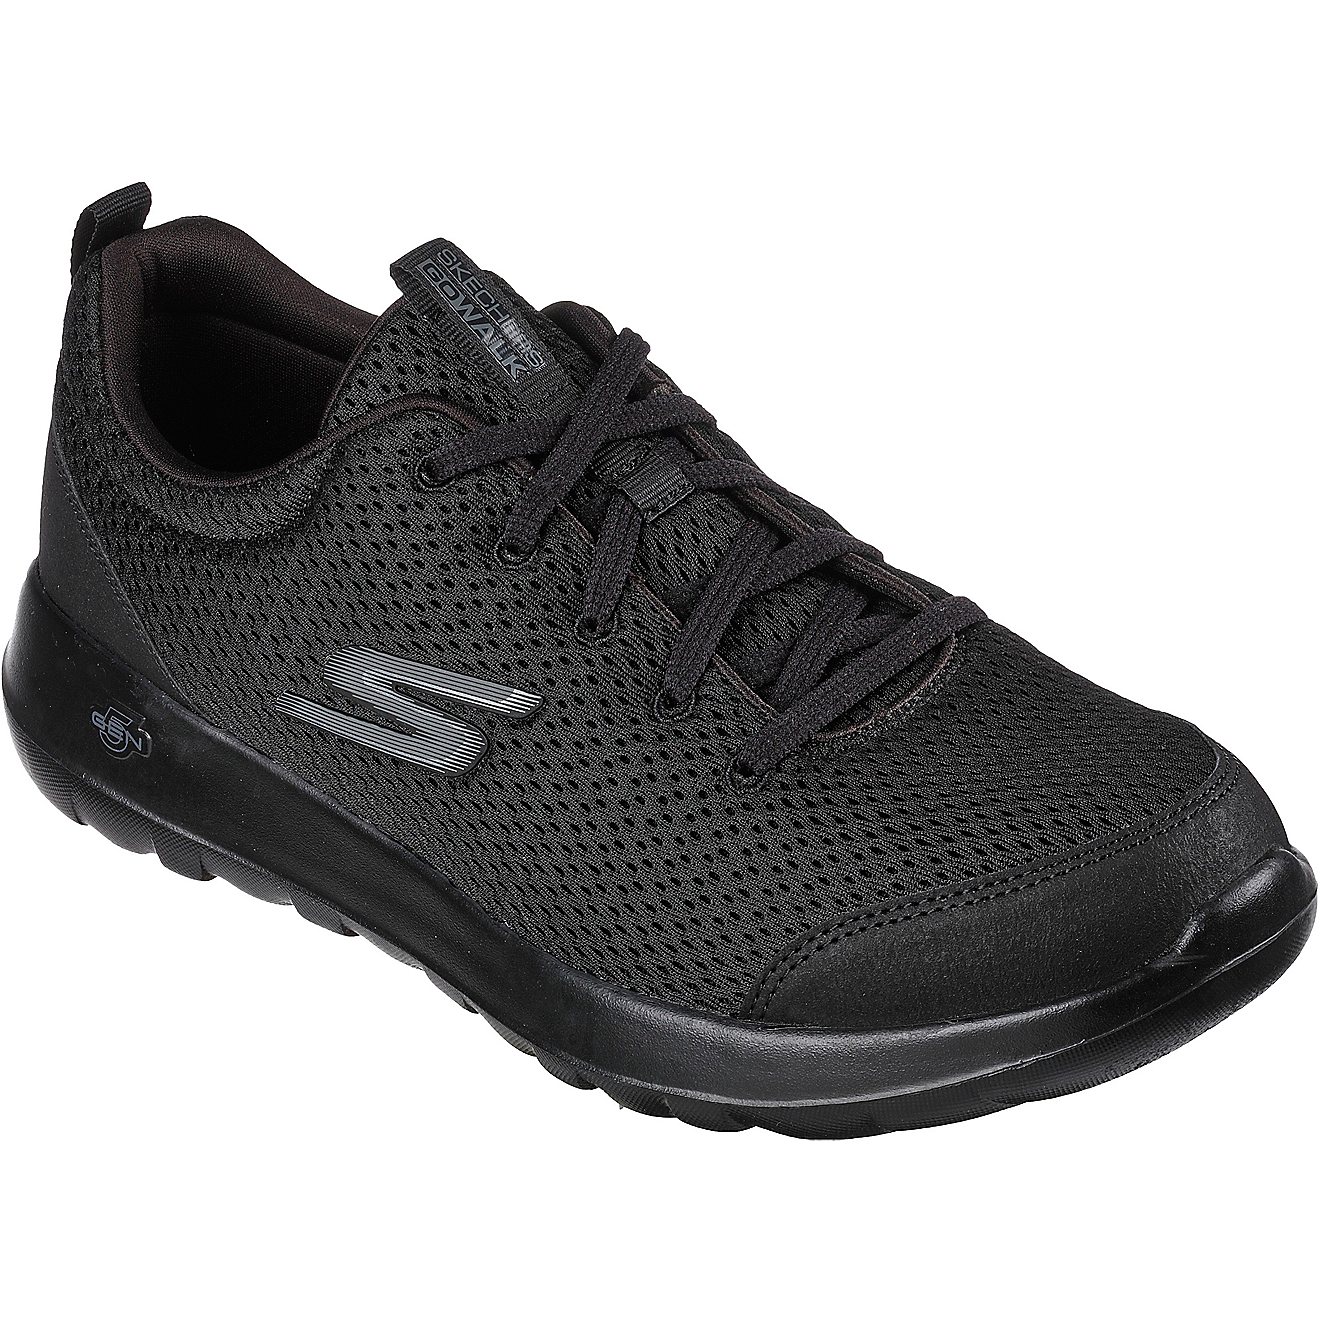 SKECHERS Men's Go Walk Max Shoes | Free Shipping at Academy